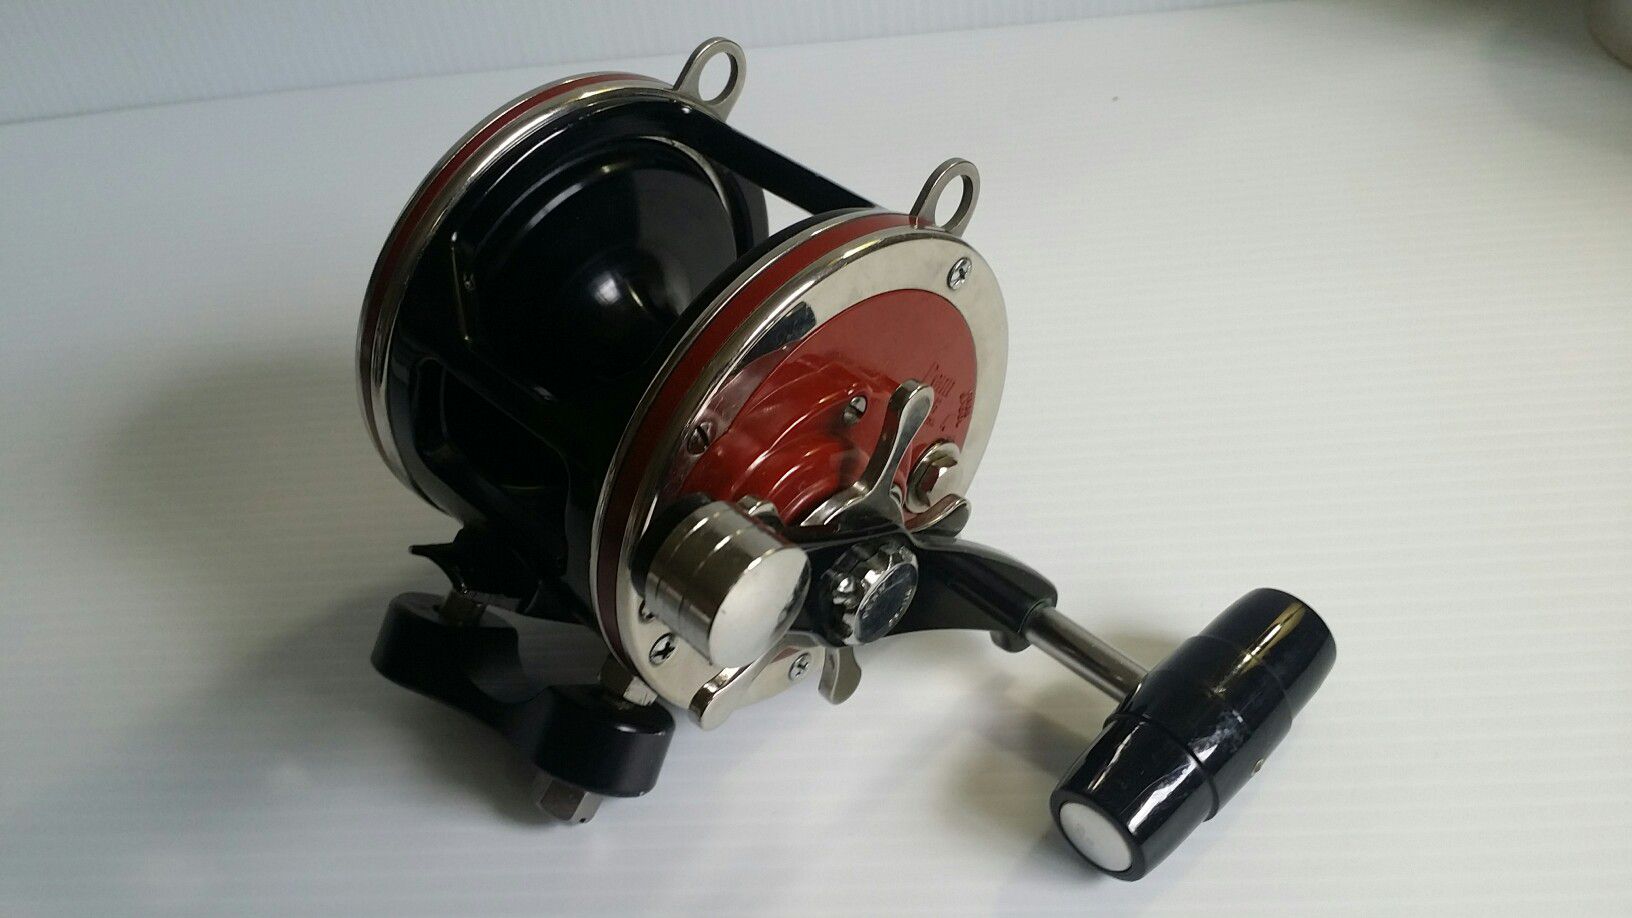 Penn 113H 4/0 Fishing Reel Yellowtail Special Narrow for Sale in